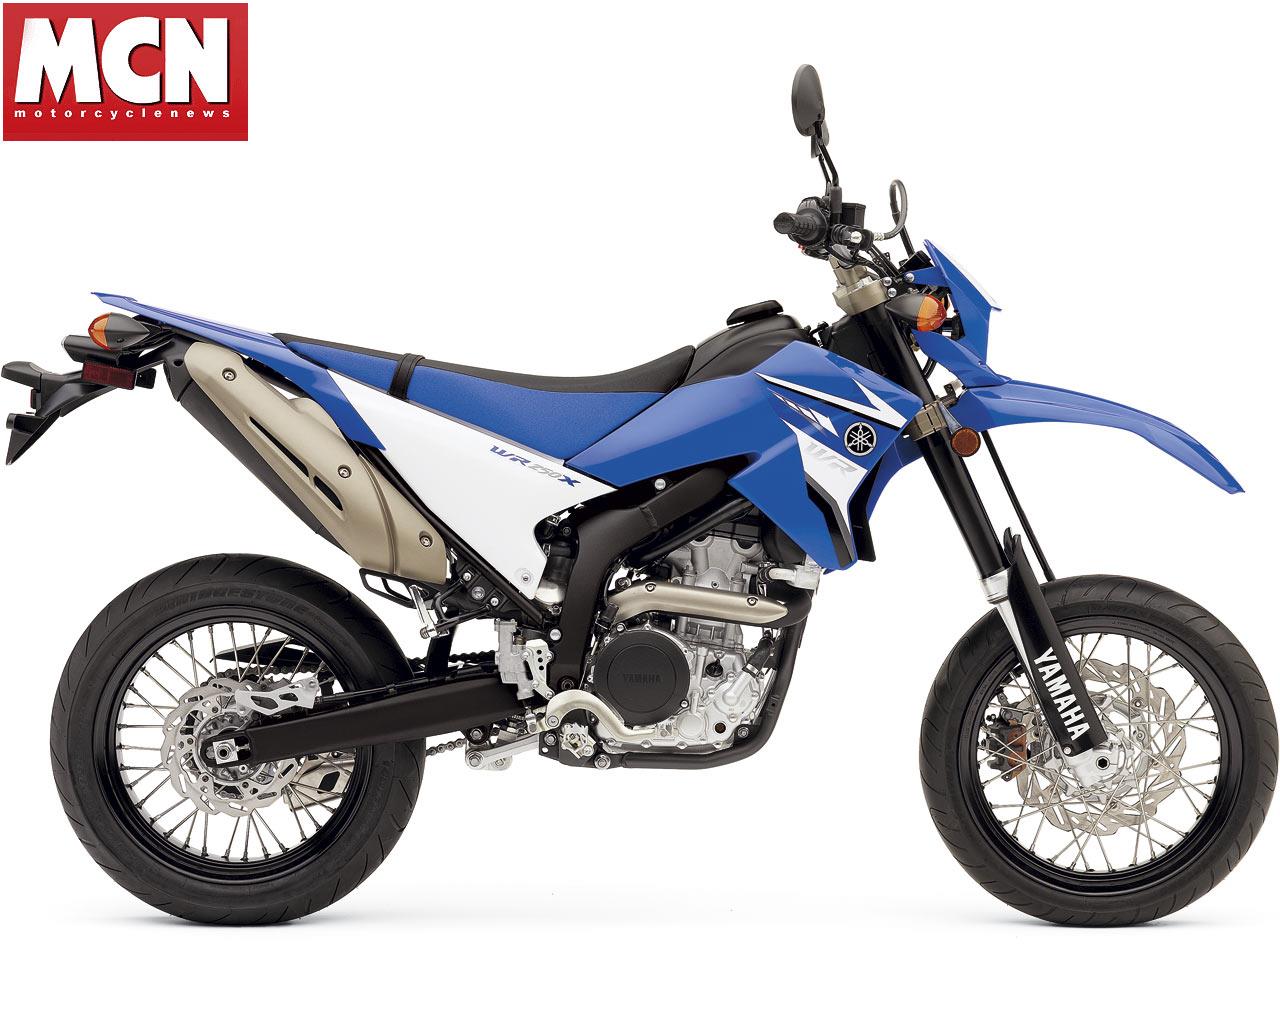 Yamaha WR250R And WR250X Off Road And Road Motorcycle Revealed